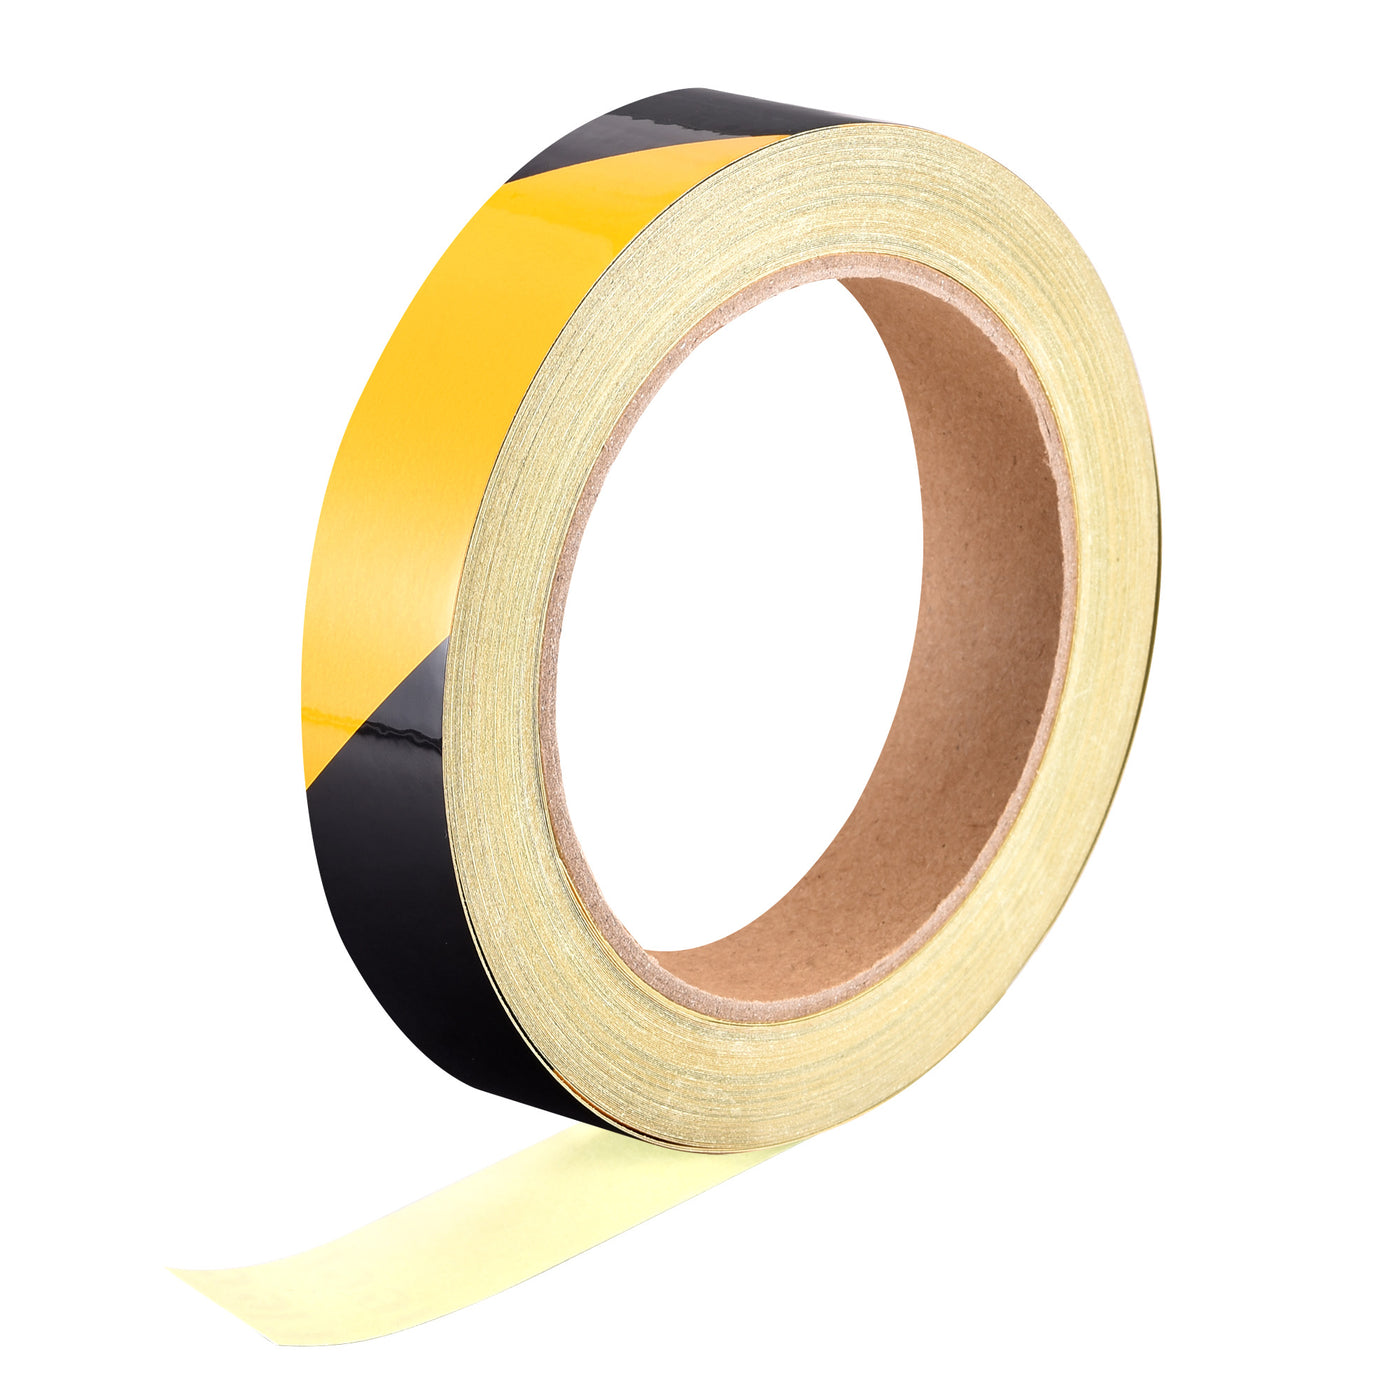 uxcell Uxcell Reflective Tape Yellow Black, 20mm x 25m, Outdoor Waterproof Warning Tape For Bikes, RV, and Boat Striping Marking